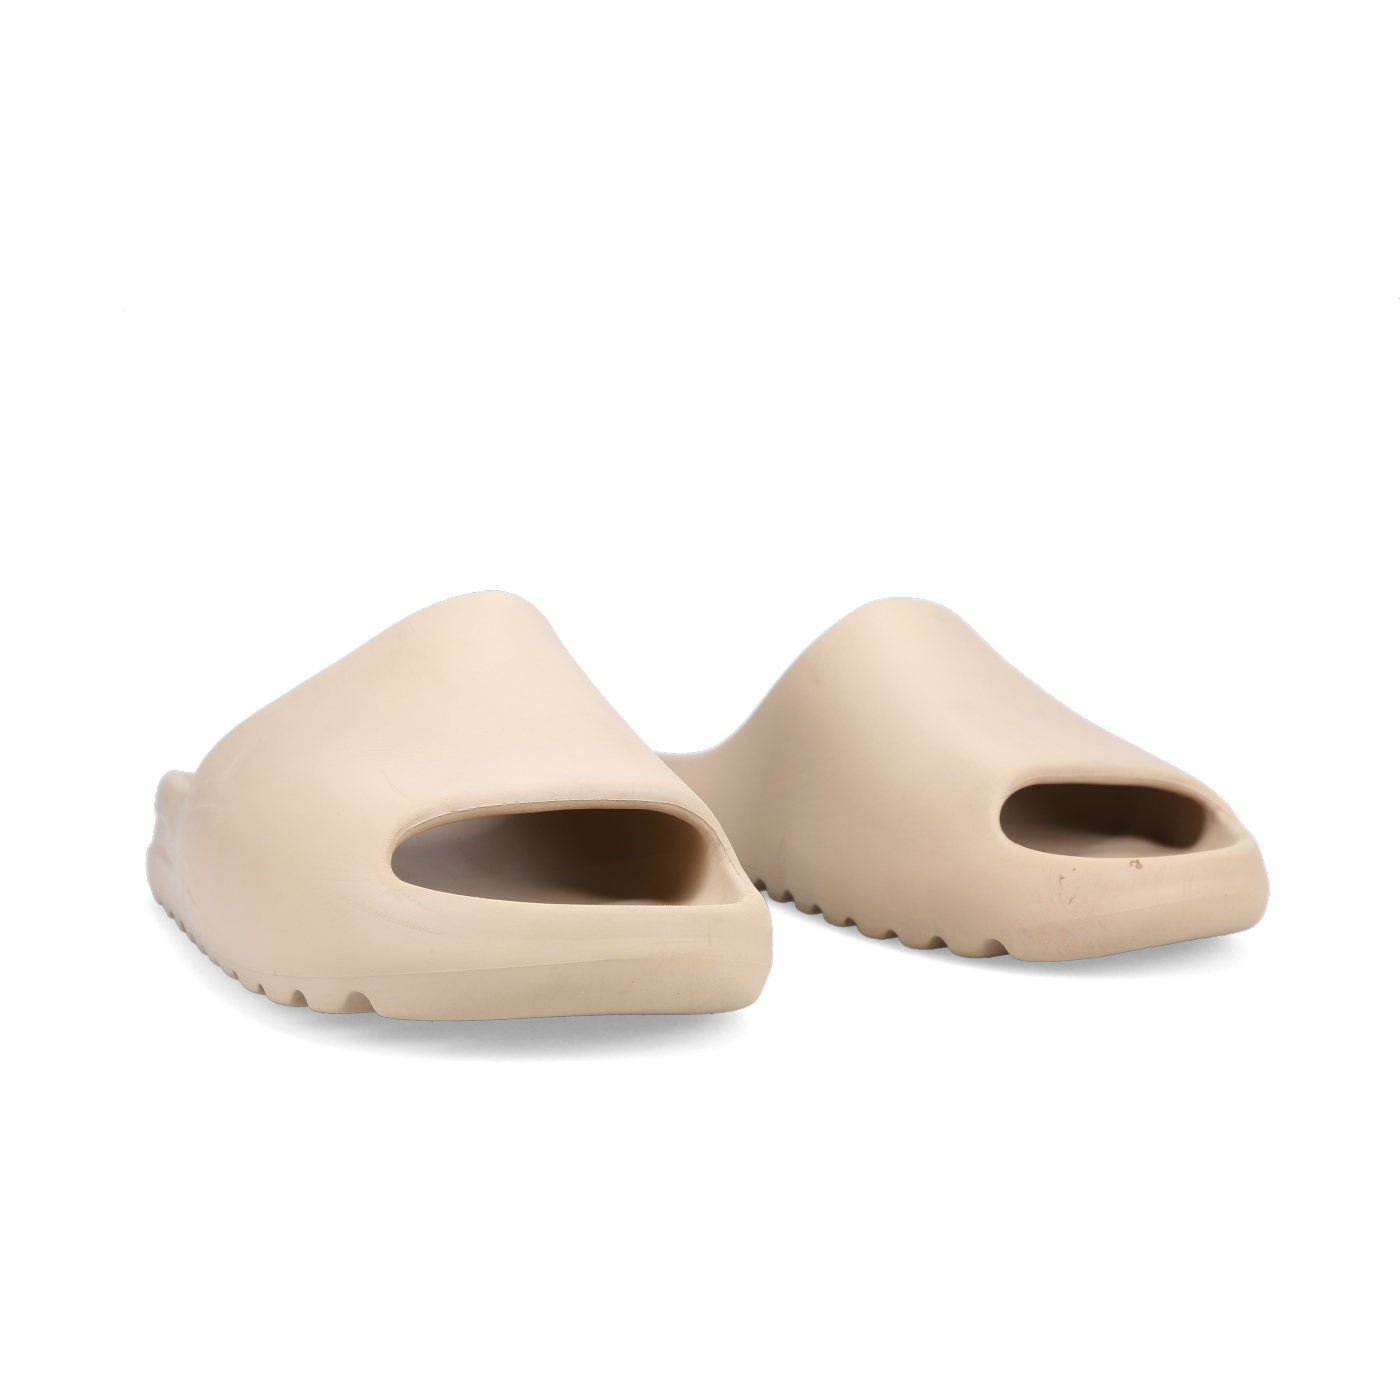 Adidas Yeezy Slides 'Pure' (First Release) - Side View